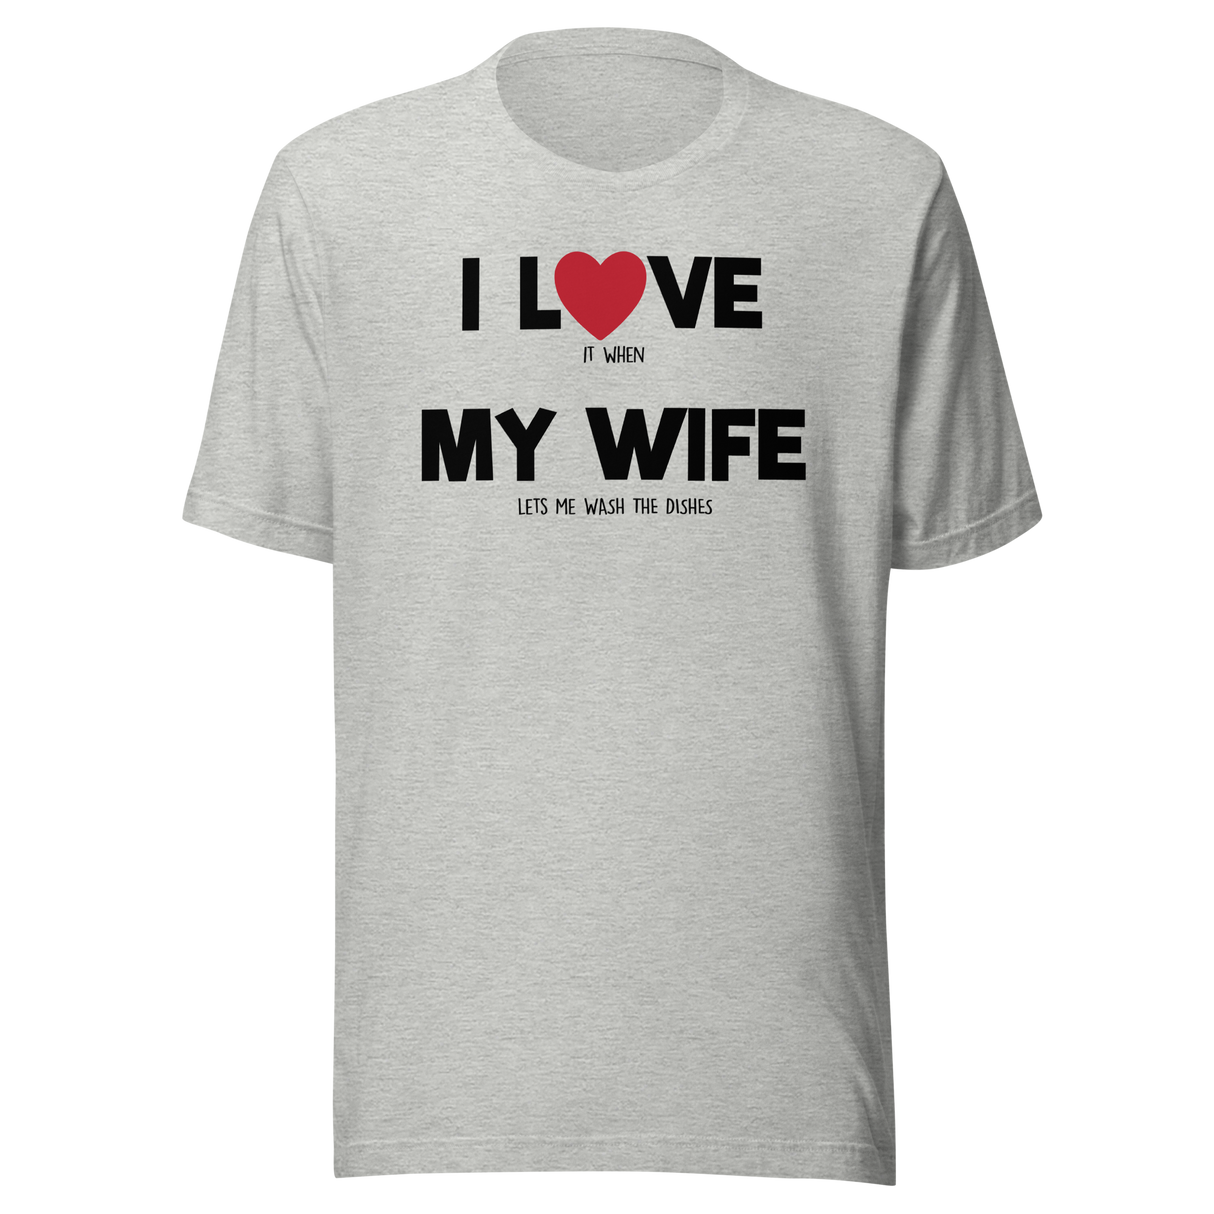 i-love-it-when-my-wife-lets-me-wash-the-dishes-i-love-my-wife-wife-tee-life-t-shirt-funny-tee-humorous-t-shirt-novelty-tee#color_athletic-heather